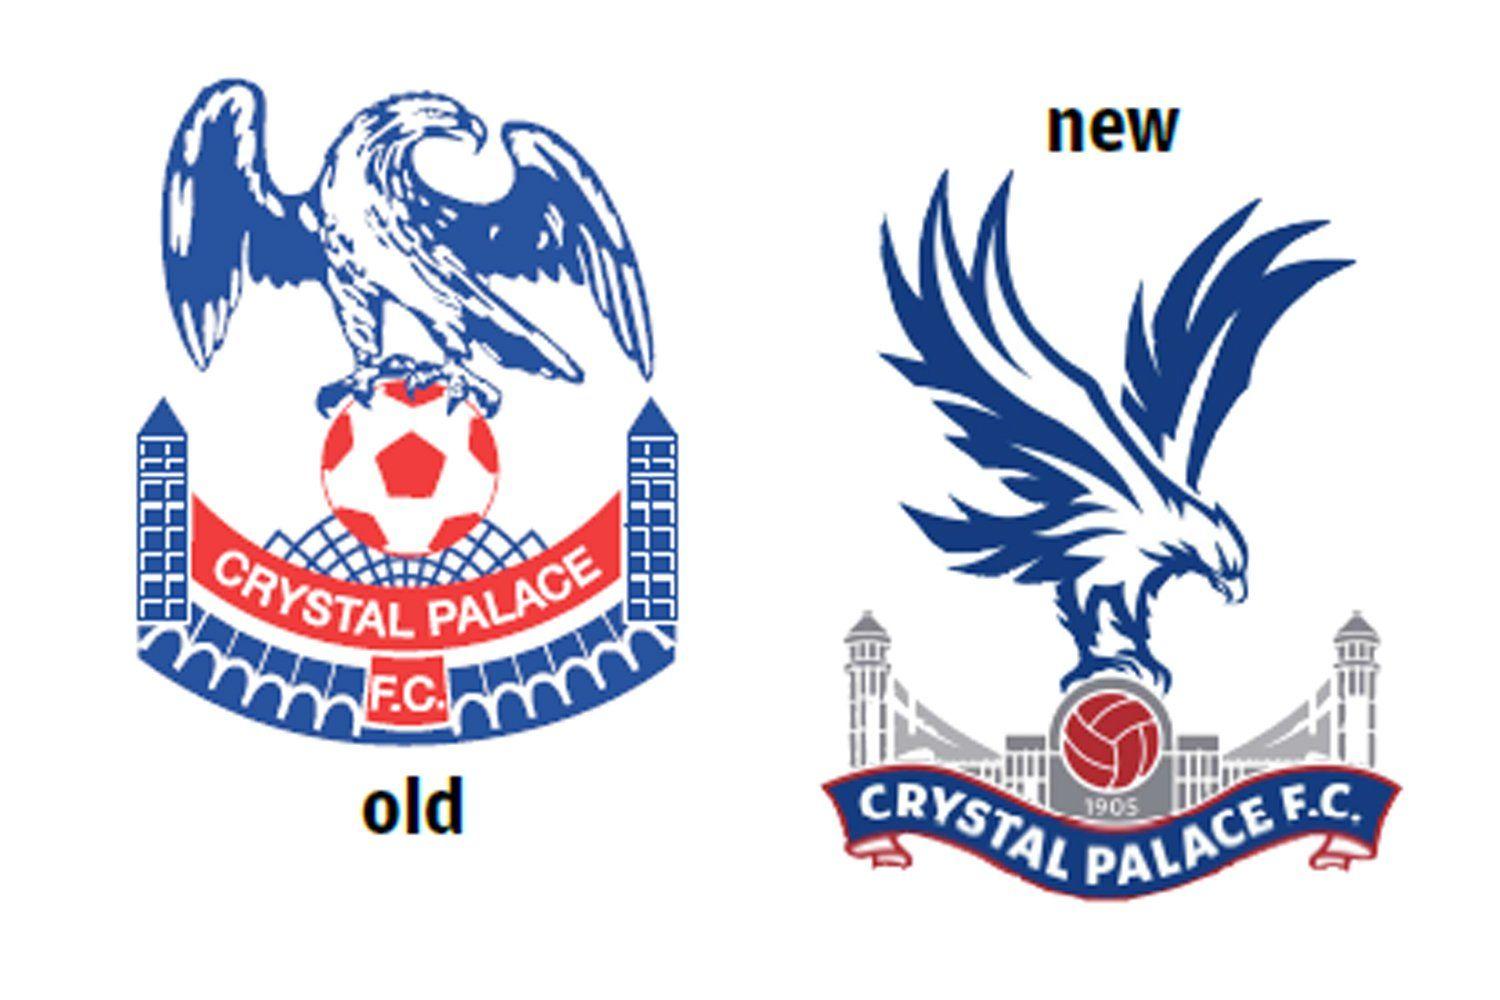 New Crystal Palace Logo - Crest fallen? The changing faces of London's Premier League clubs ...